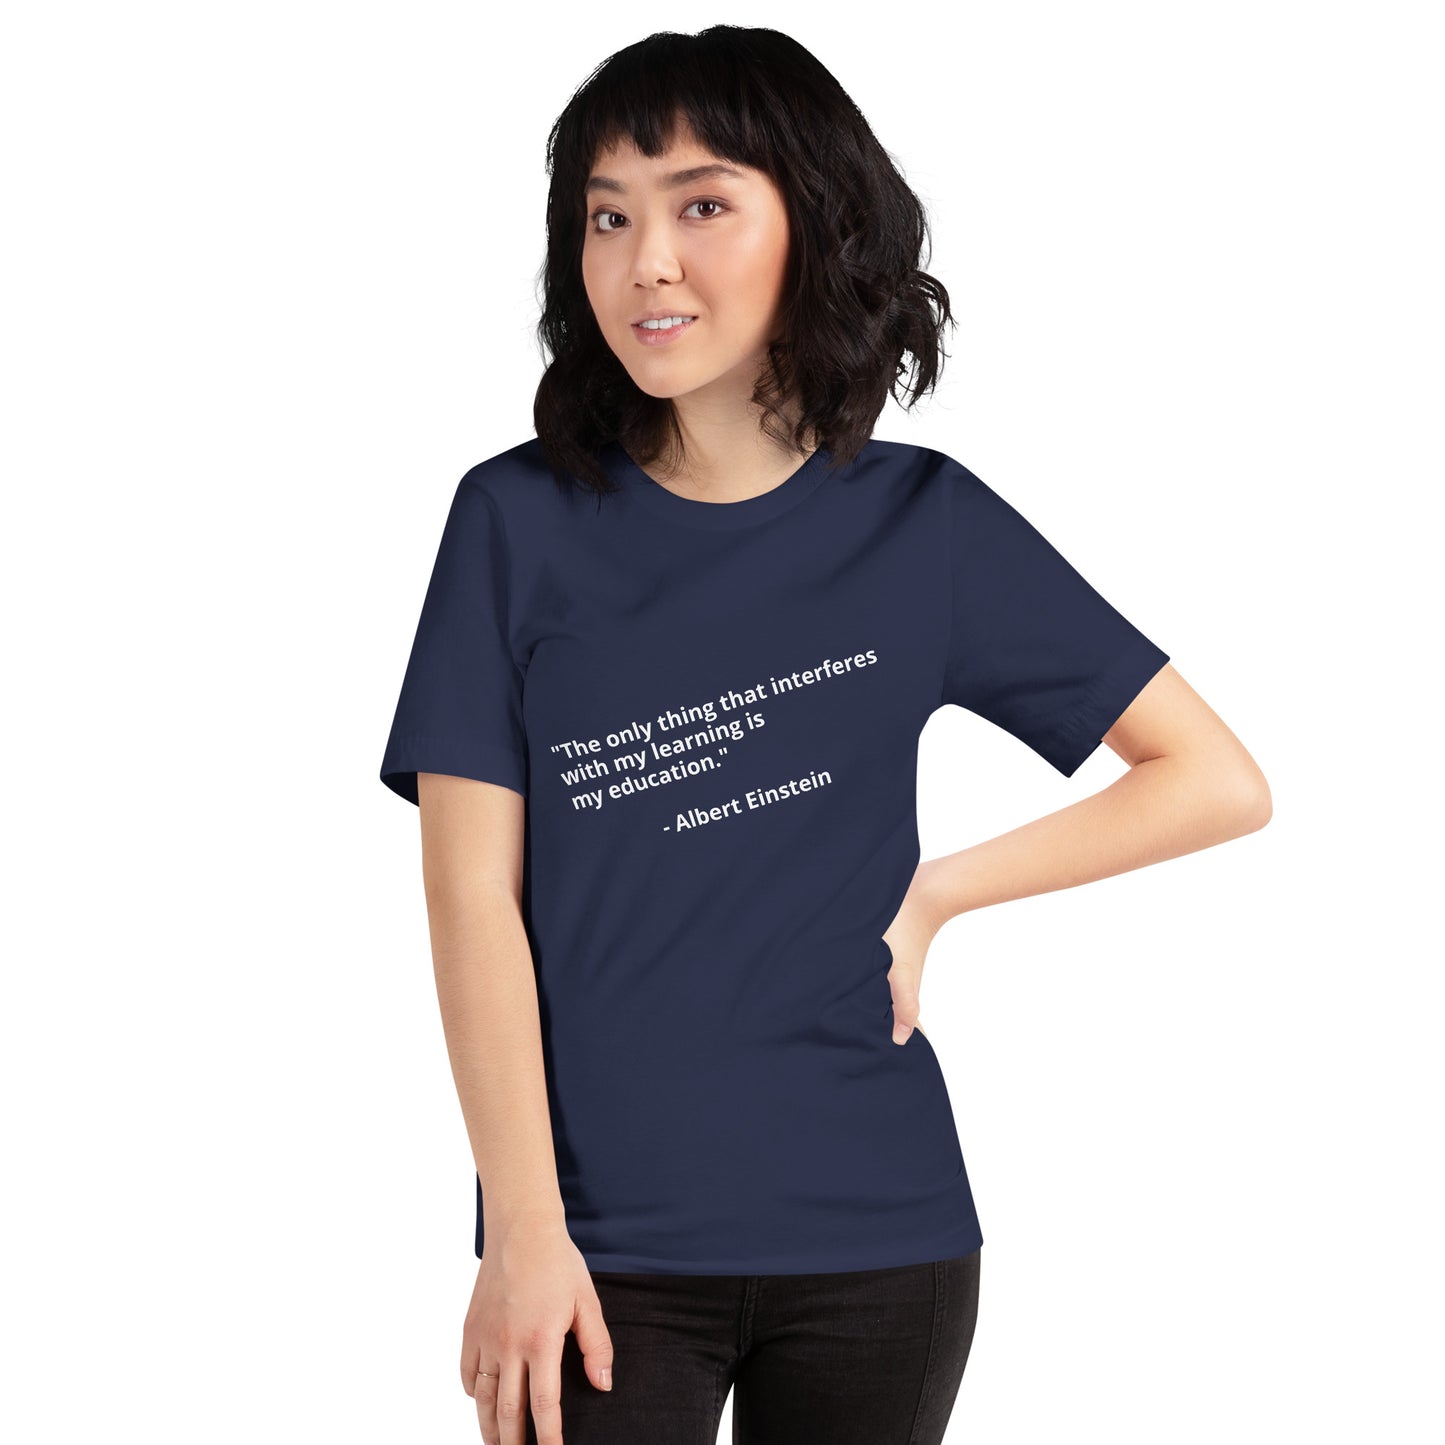 "The only thing that interferes with my learning is my education." - Albert Einstein - Unisex t-shirt